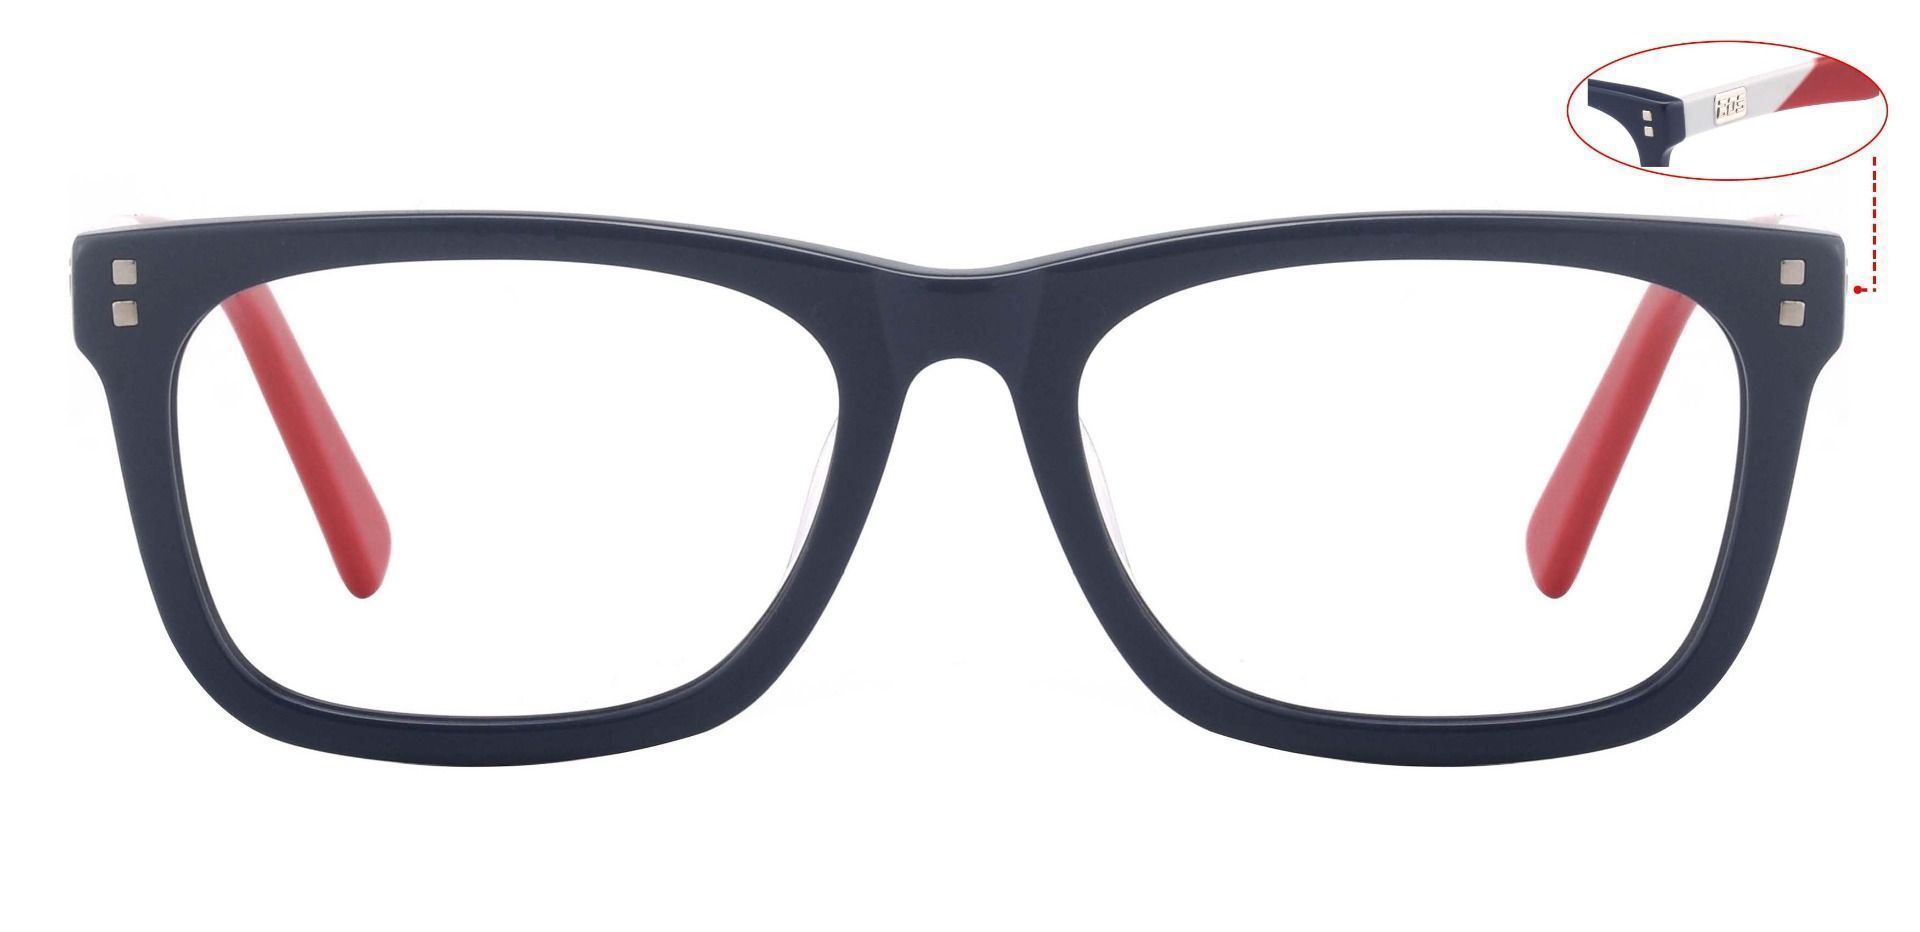 Harbor Rectangle Reading Glasses - The Frame Is Blue And Red